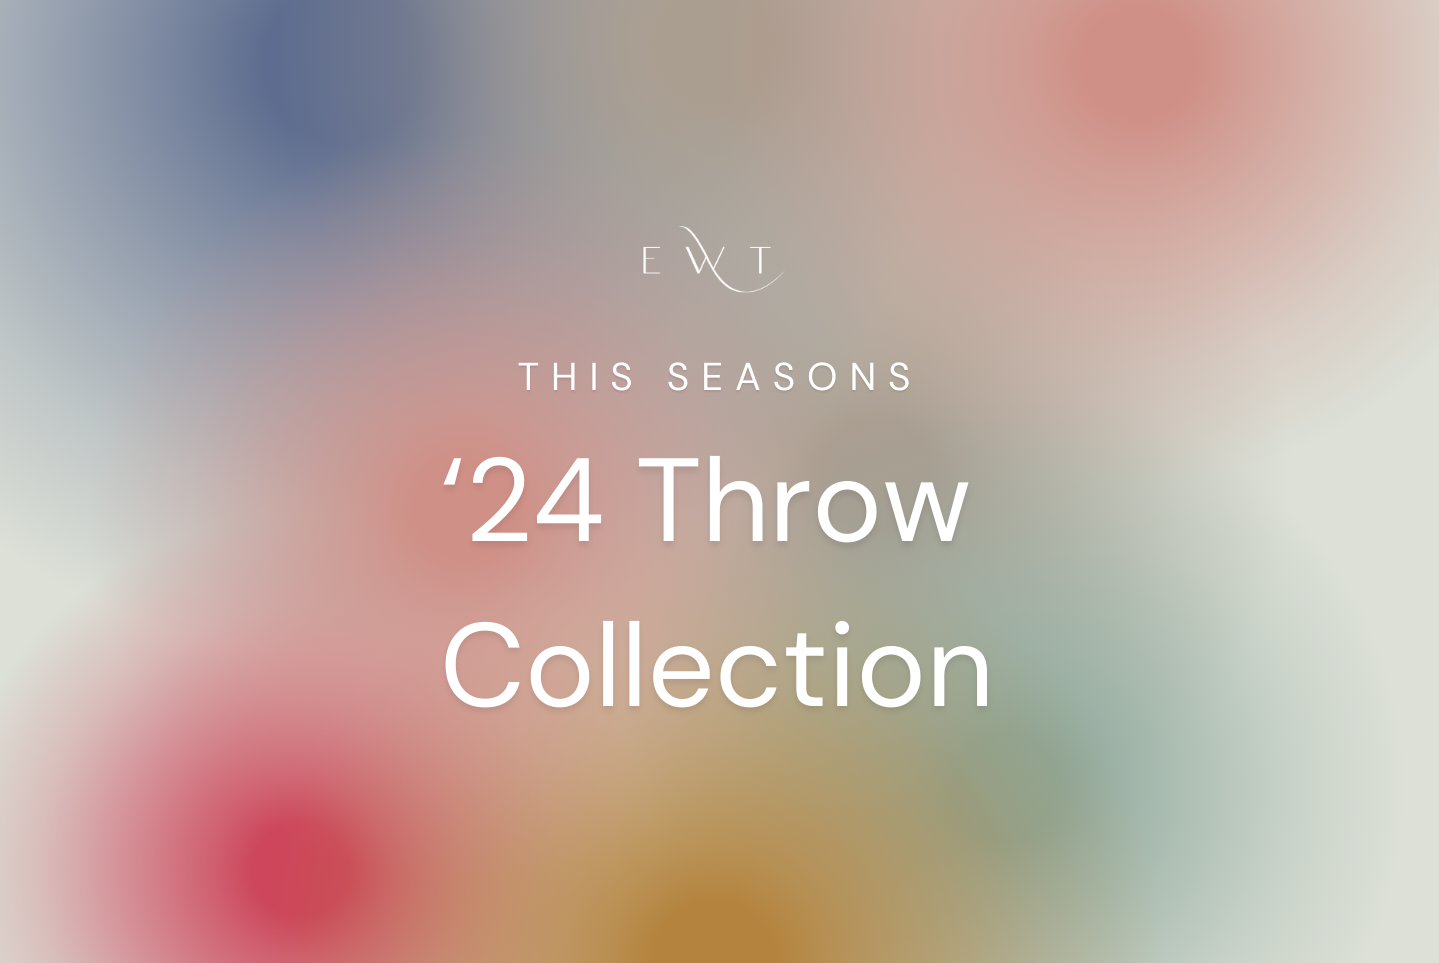 '21 Throw Collection